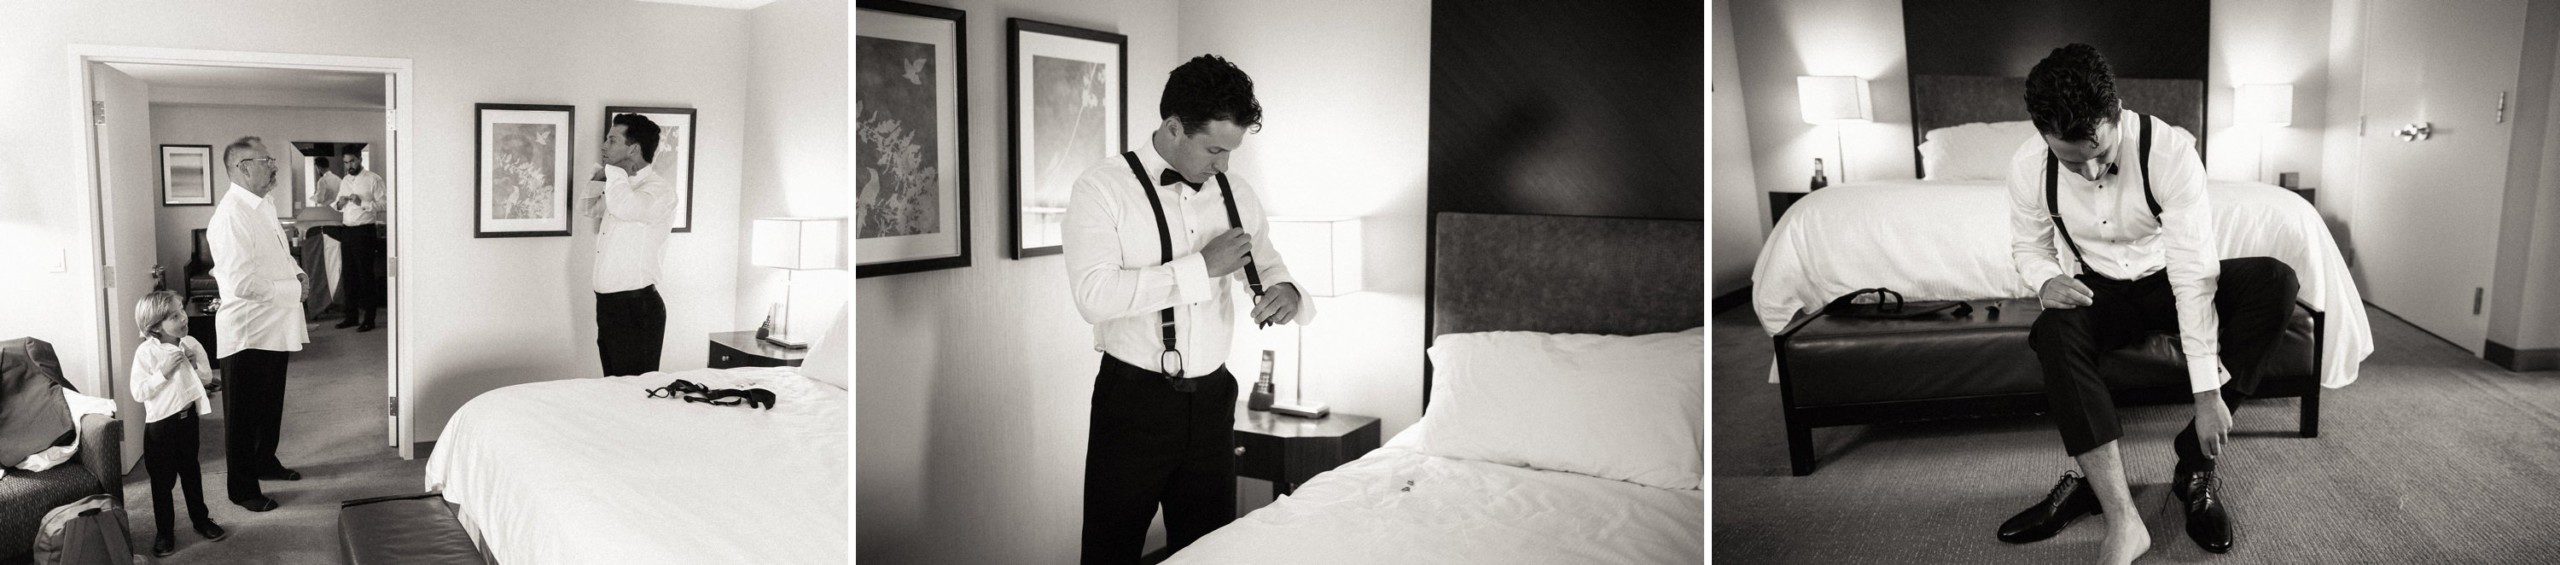 groom getting ready at The Westin Book Cadillac